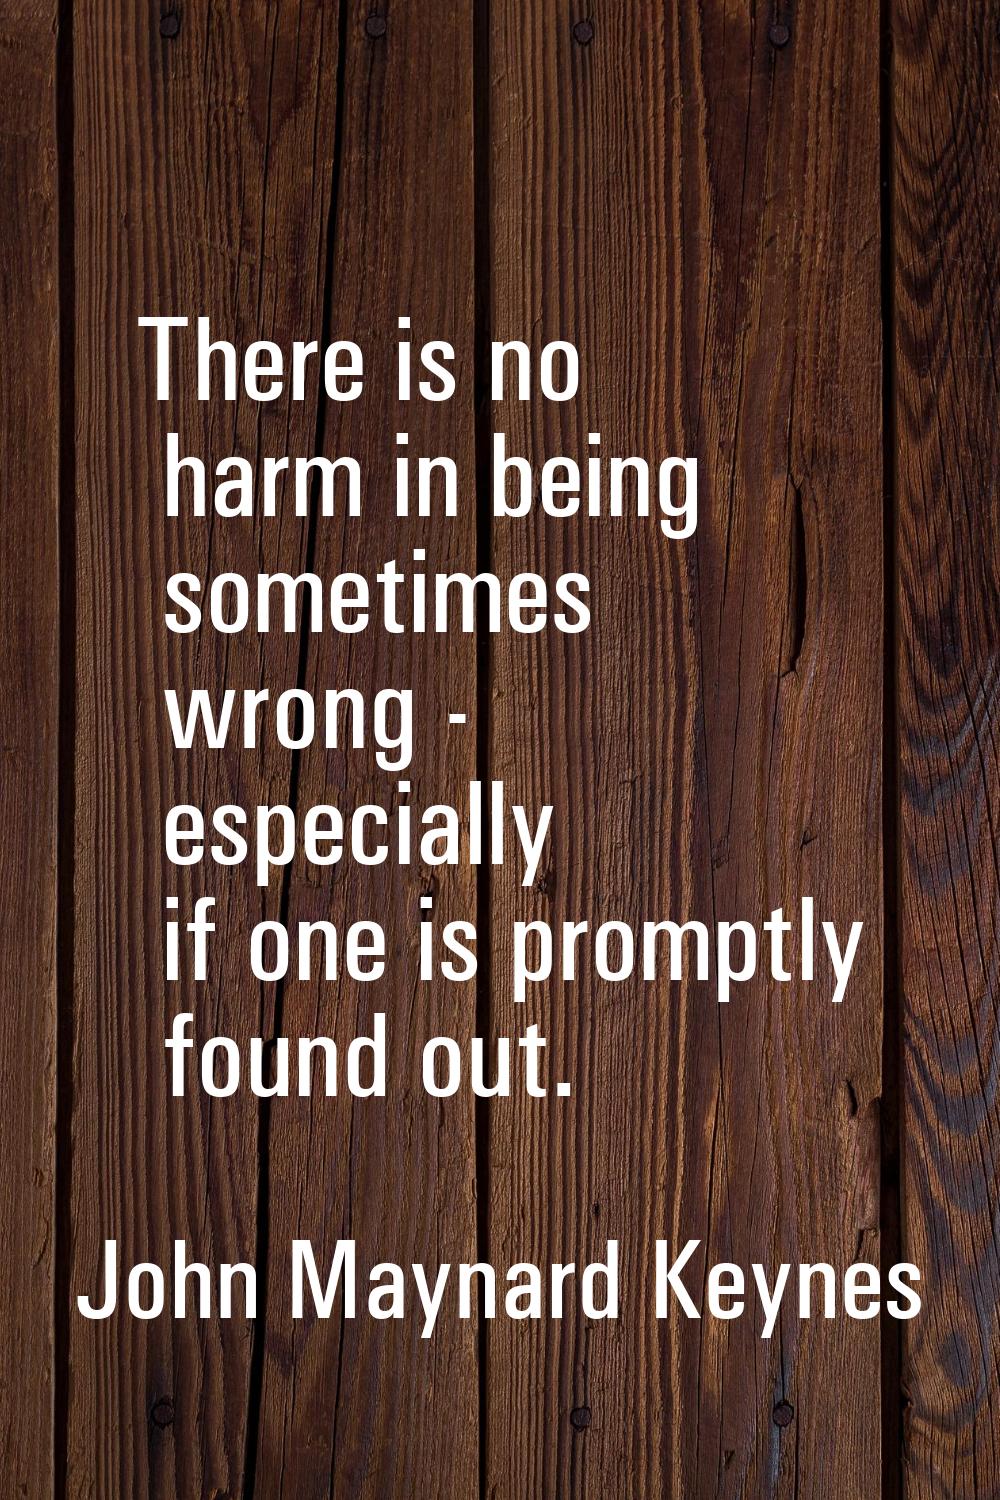 There is no harm in being sometimes wrong - especially if one is promptly found out.